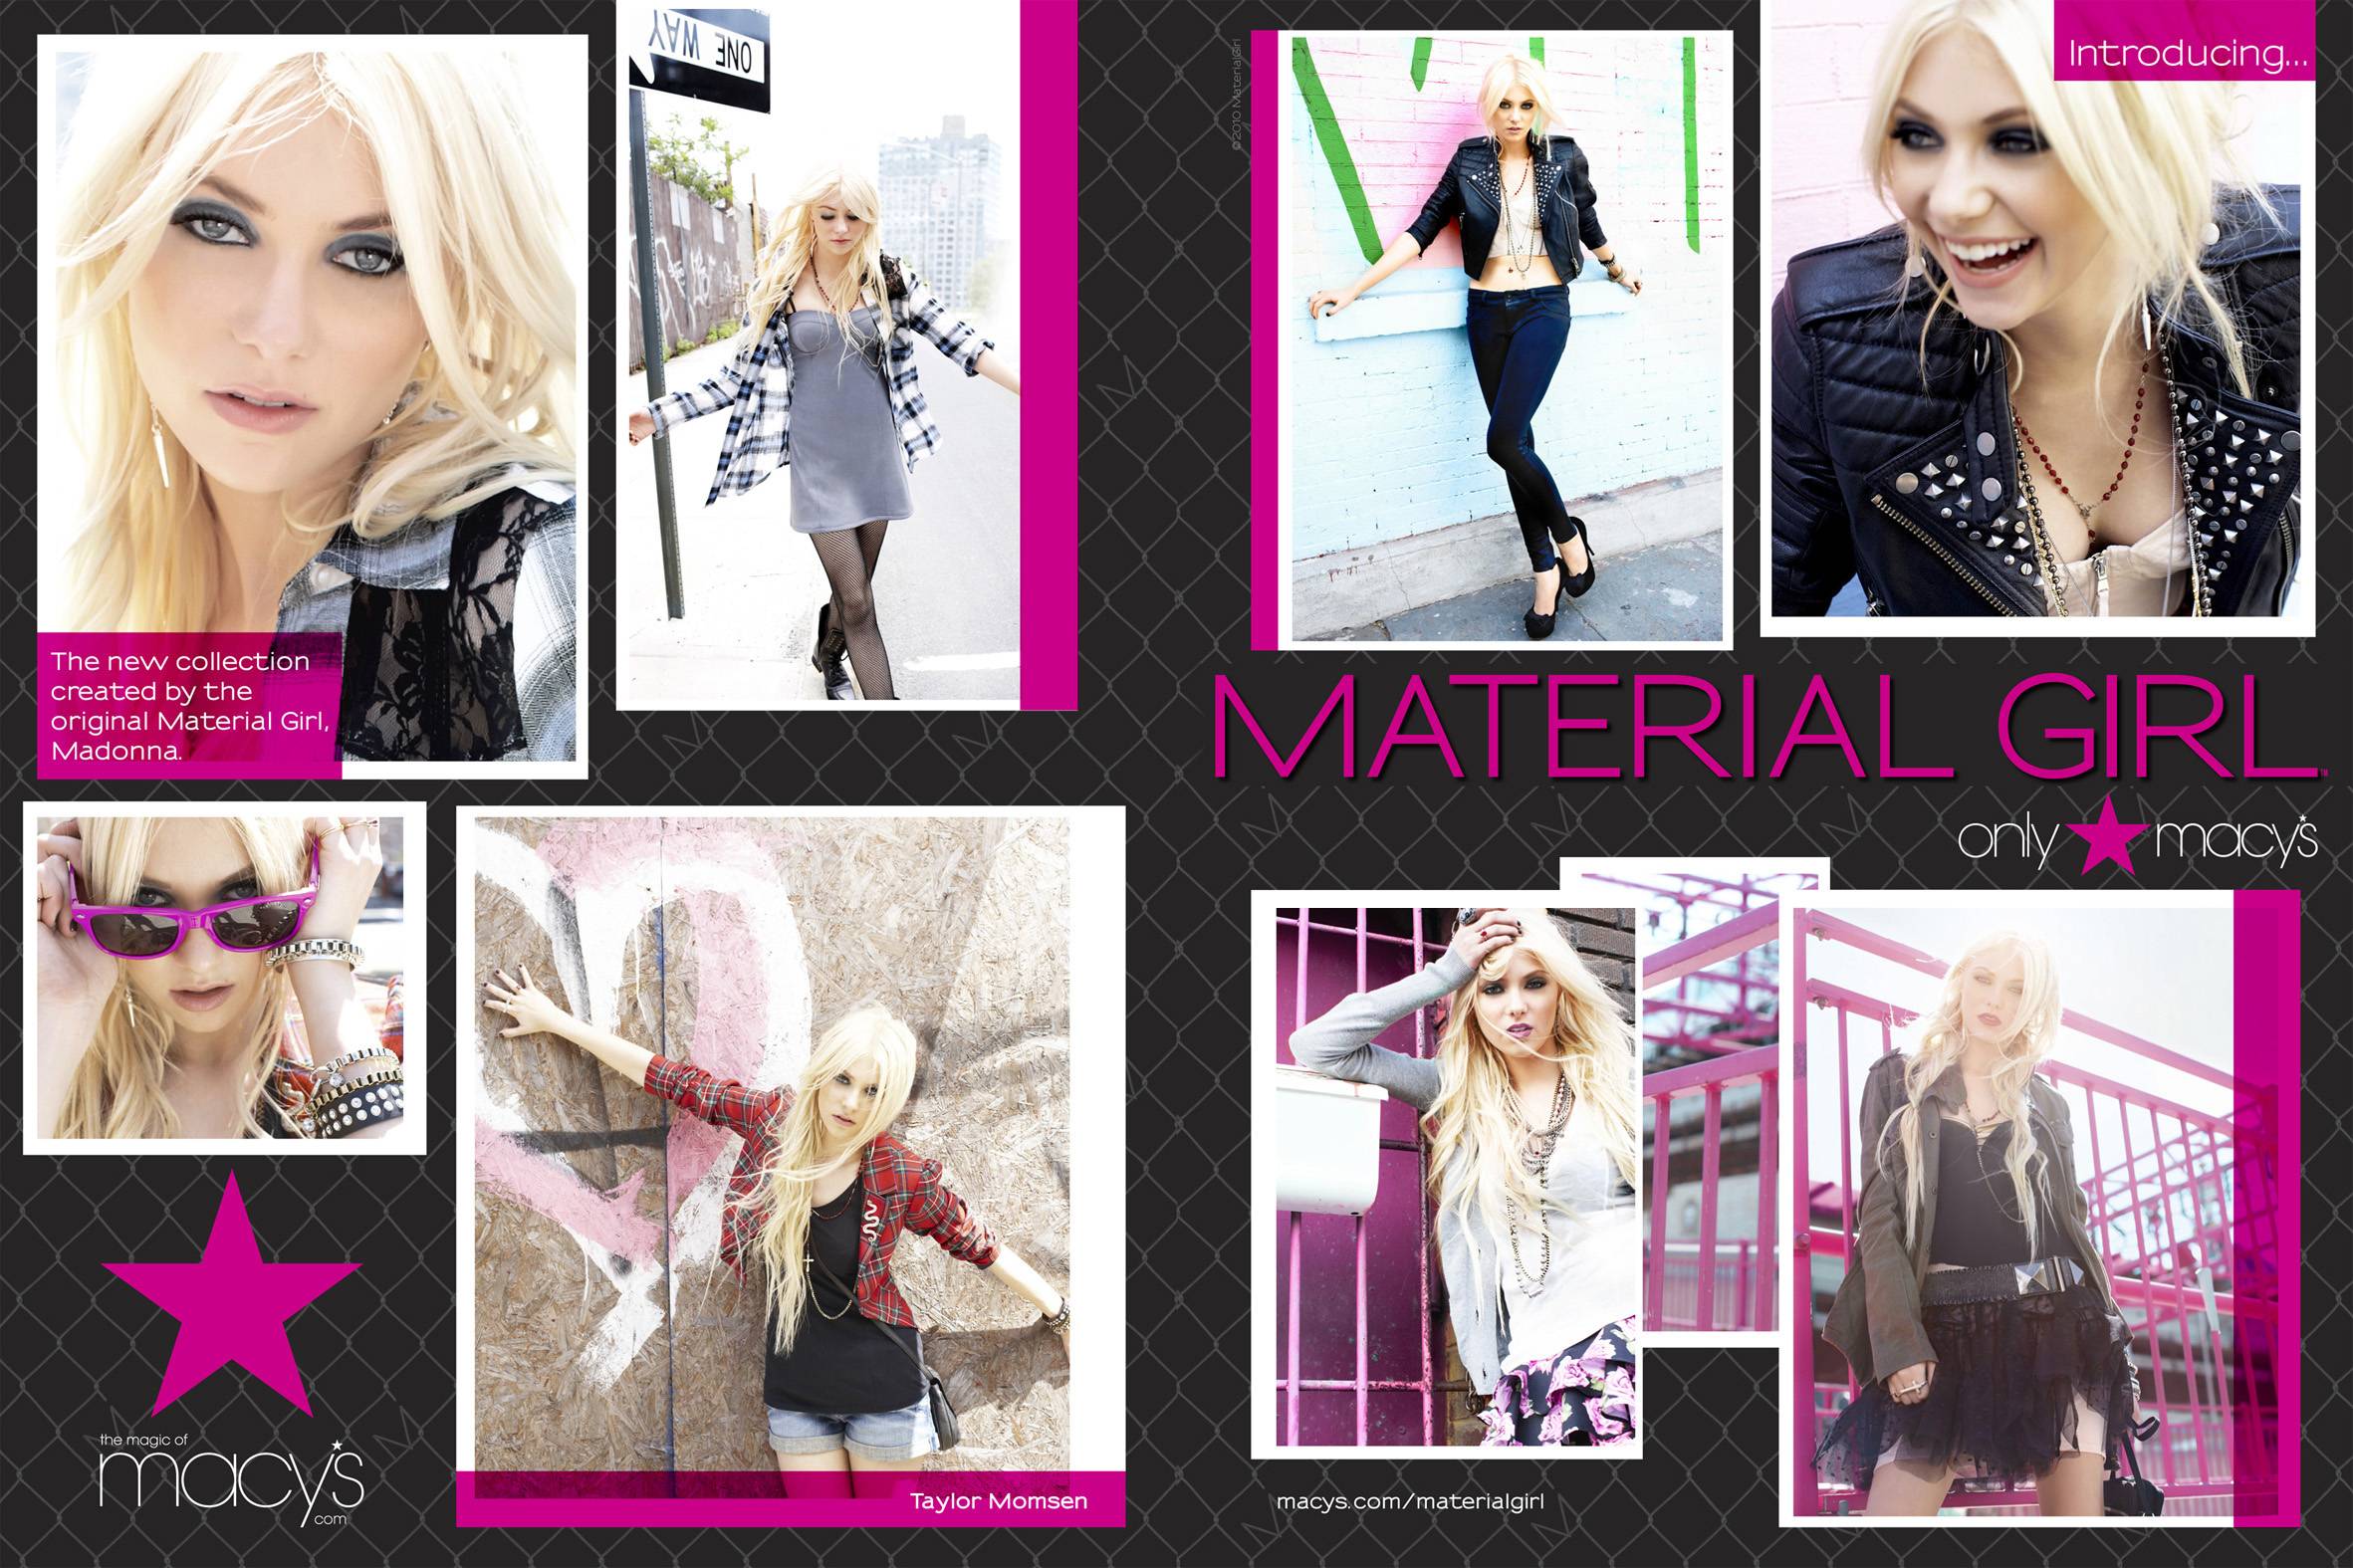 madonna material girl clothing